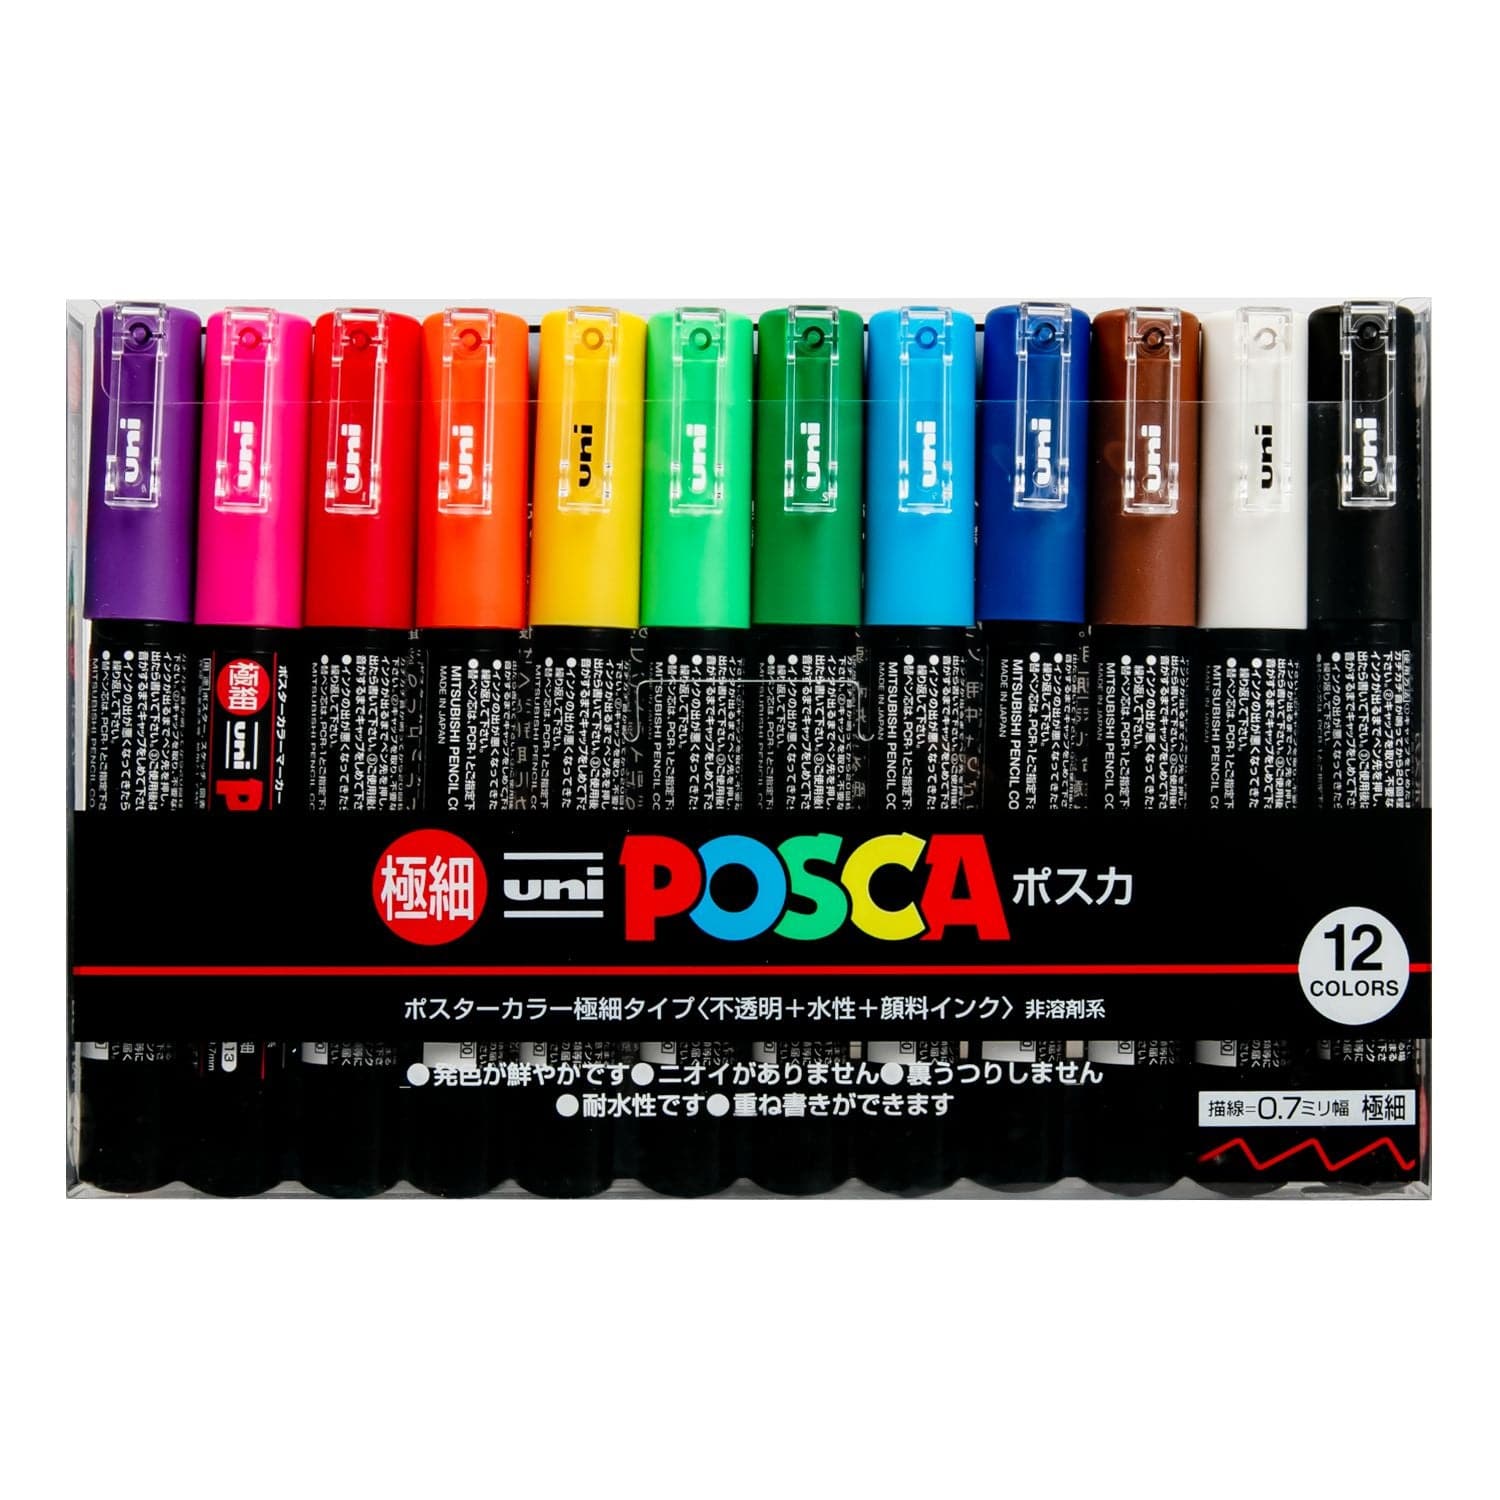 https://www.shopriot.shop/wp-content/uploads/1689/28/get-premium-posca-paint-marker-pen-extra-fine-point-set-of-12-pc-1m12c-959-for-unbeatable-prices-on-our-website_0.jpg